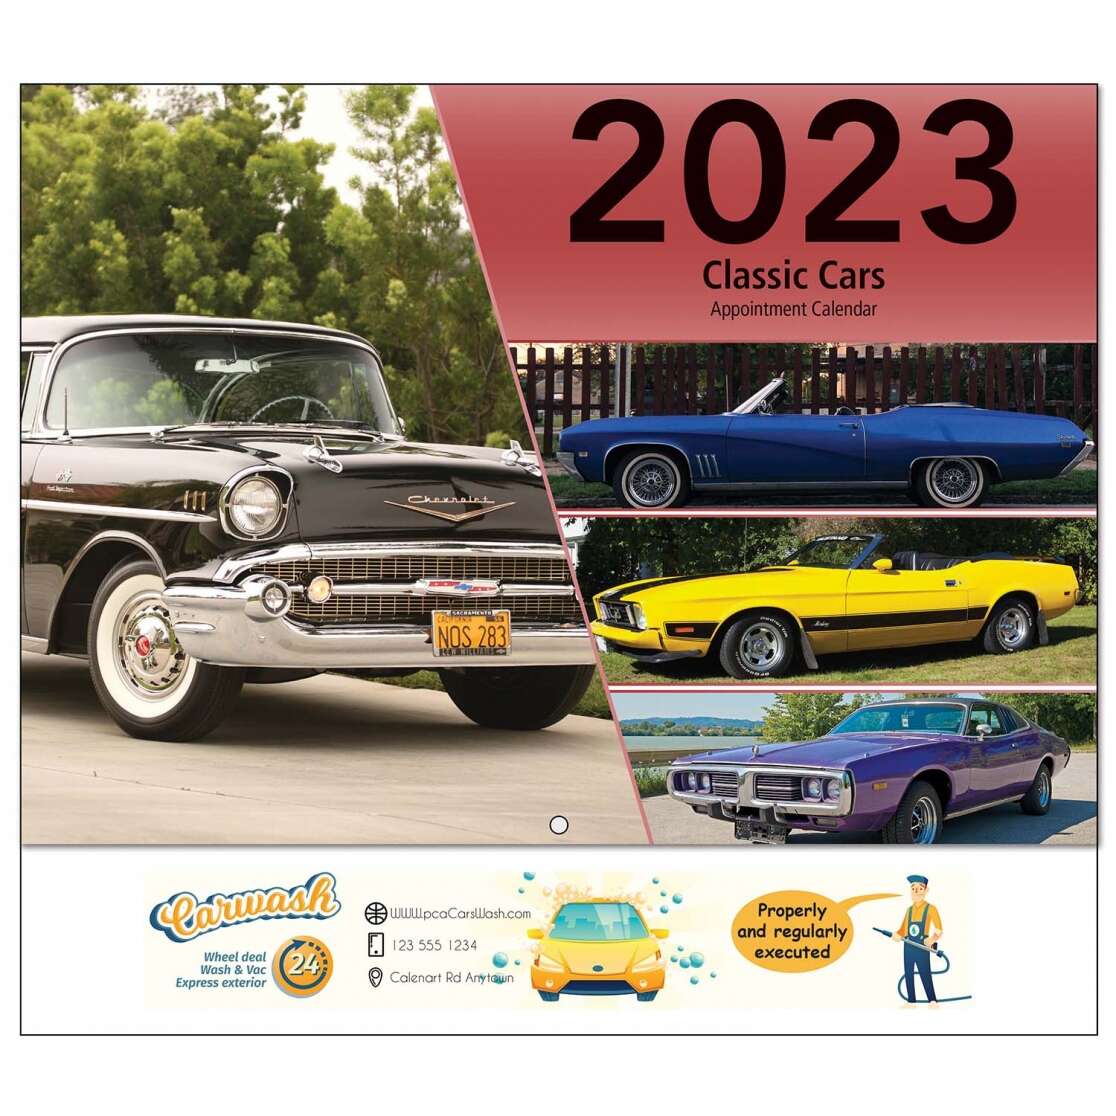 Classic car wall calendars for businesses or antique car lovers.